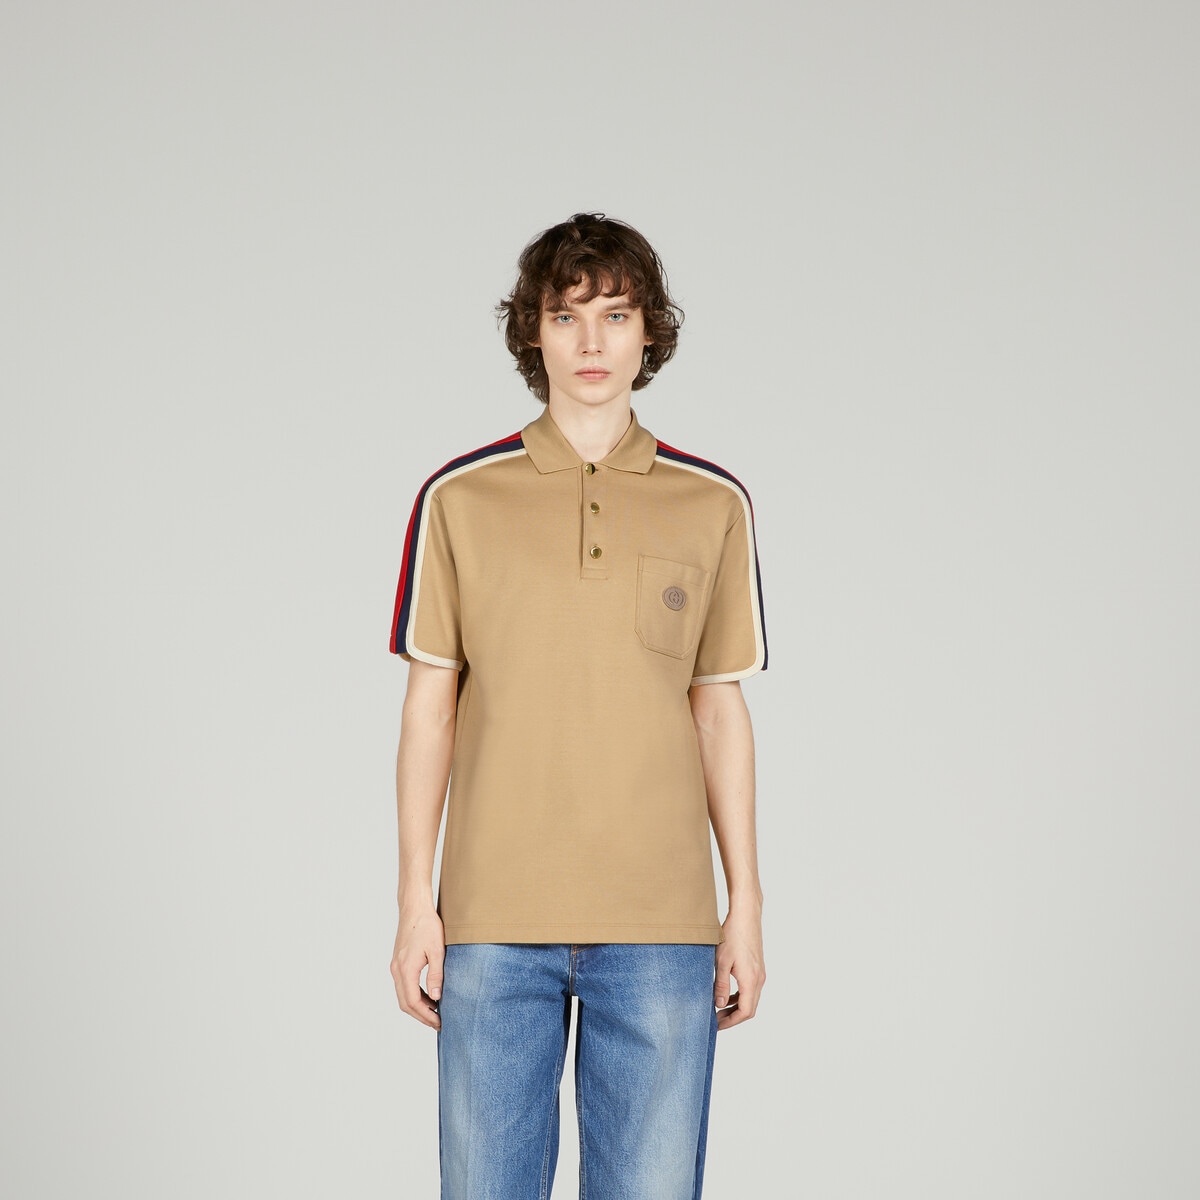 Cotton jersey polo shirt with Web - 6